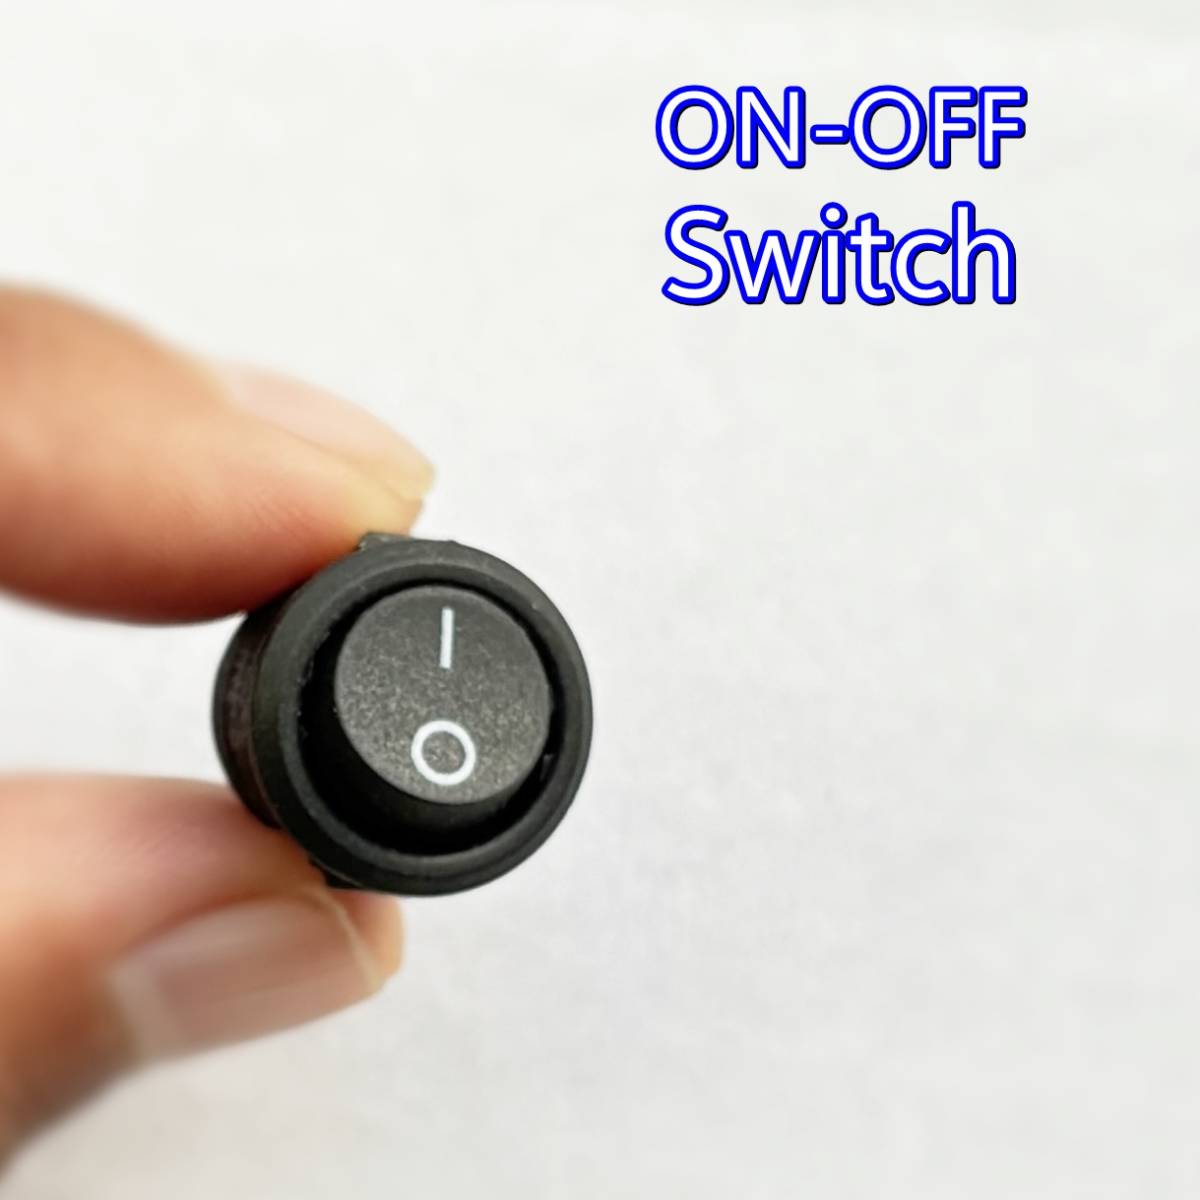  free shipping rocker switch # embedded #ON OFF switch teeter locker single ultimate 2 ultimate switch #DIY small size circle shape supplies LED construction # power supply go in / cut 